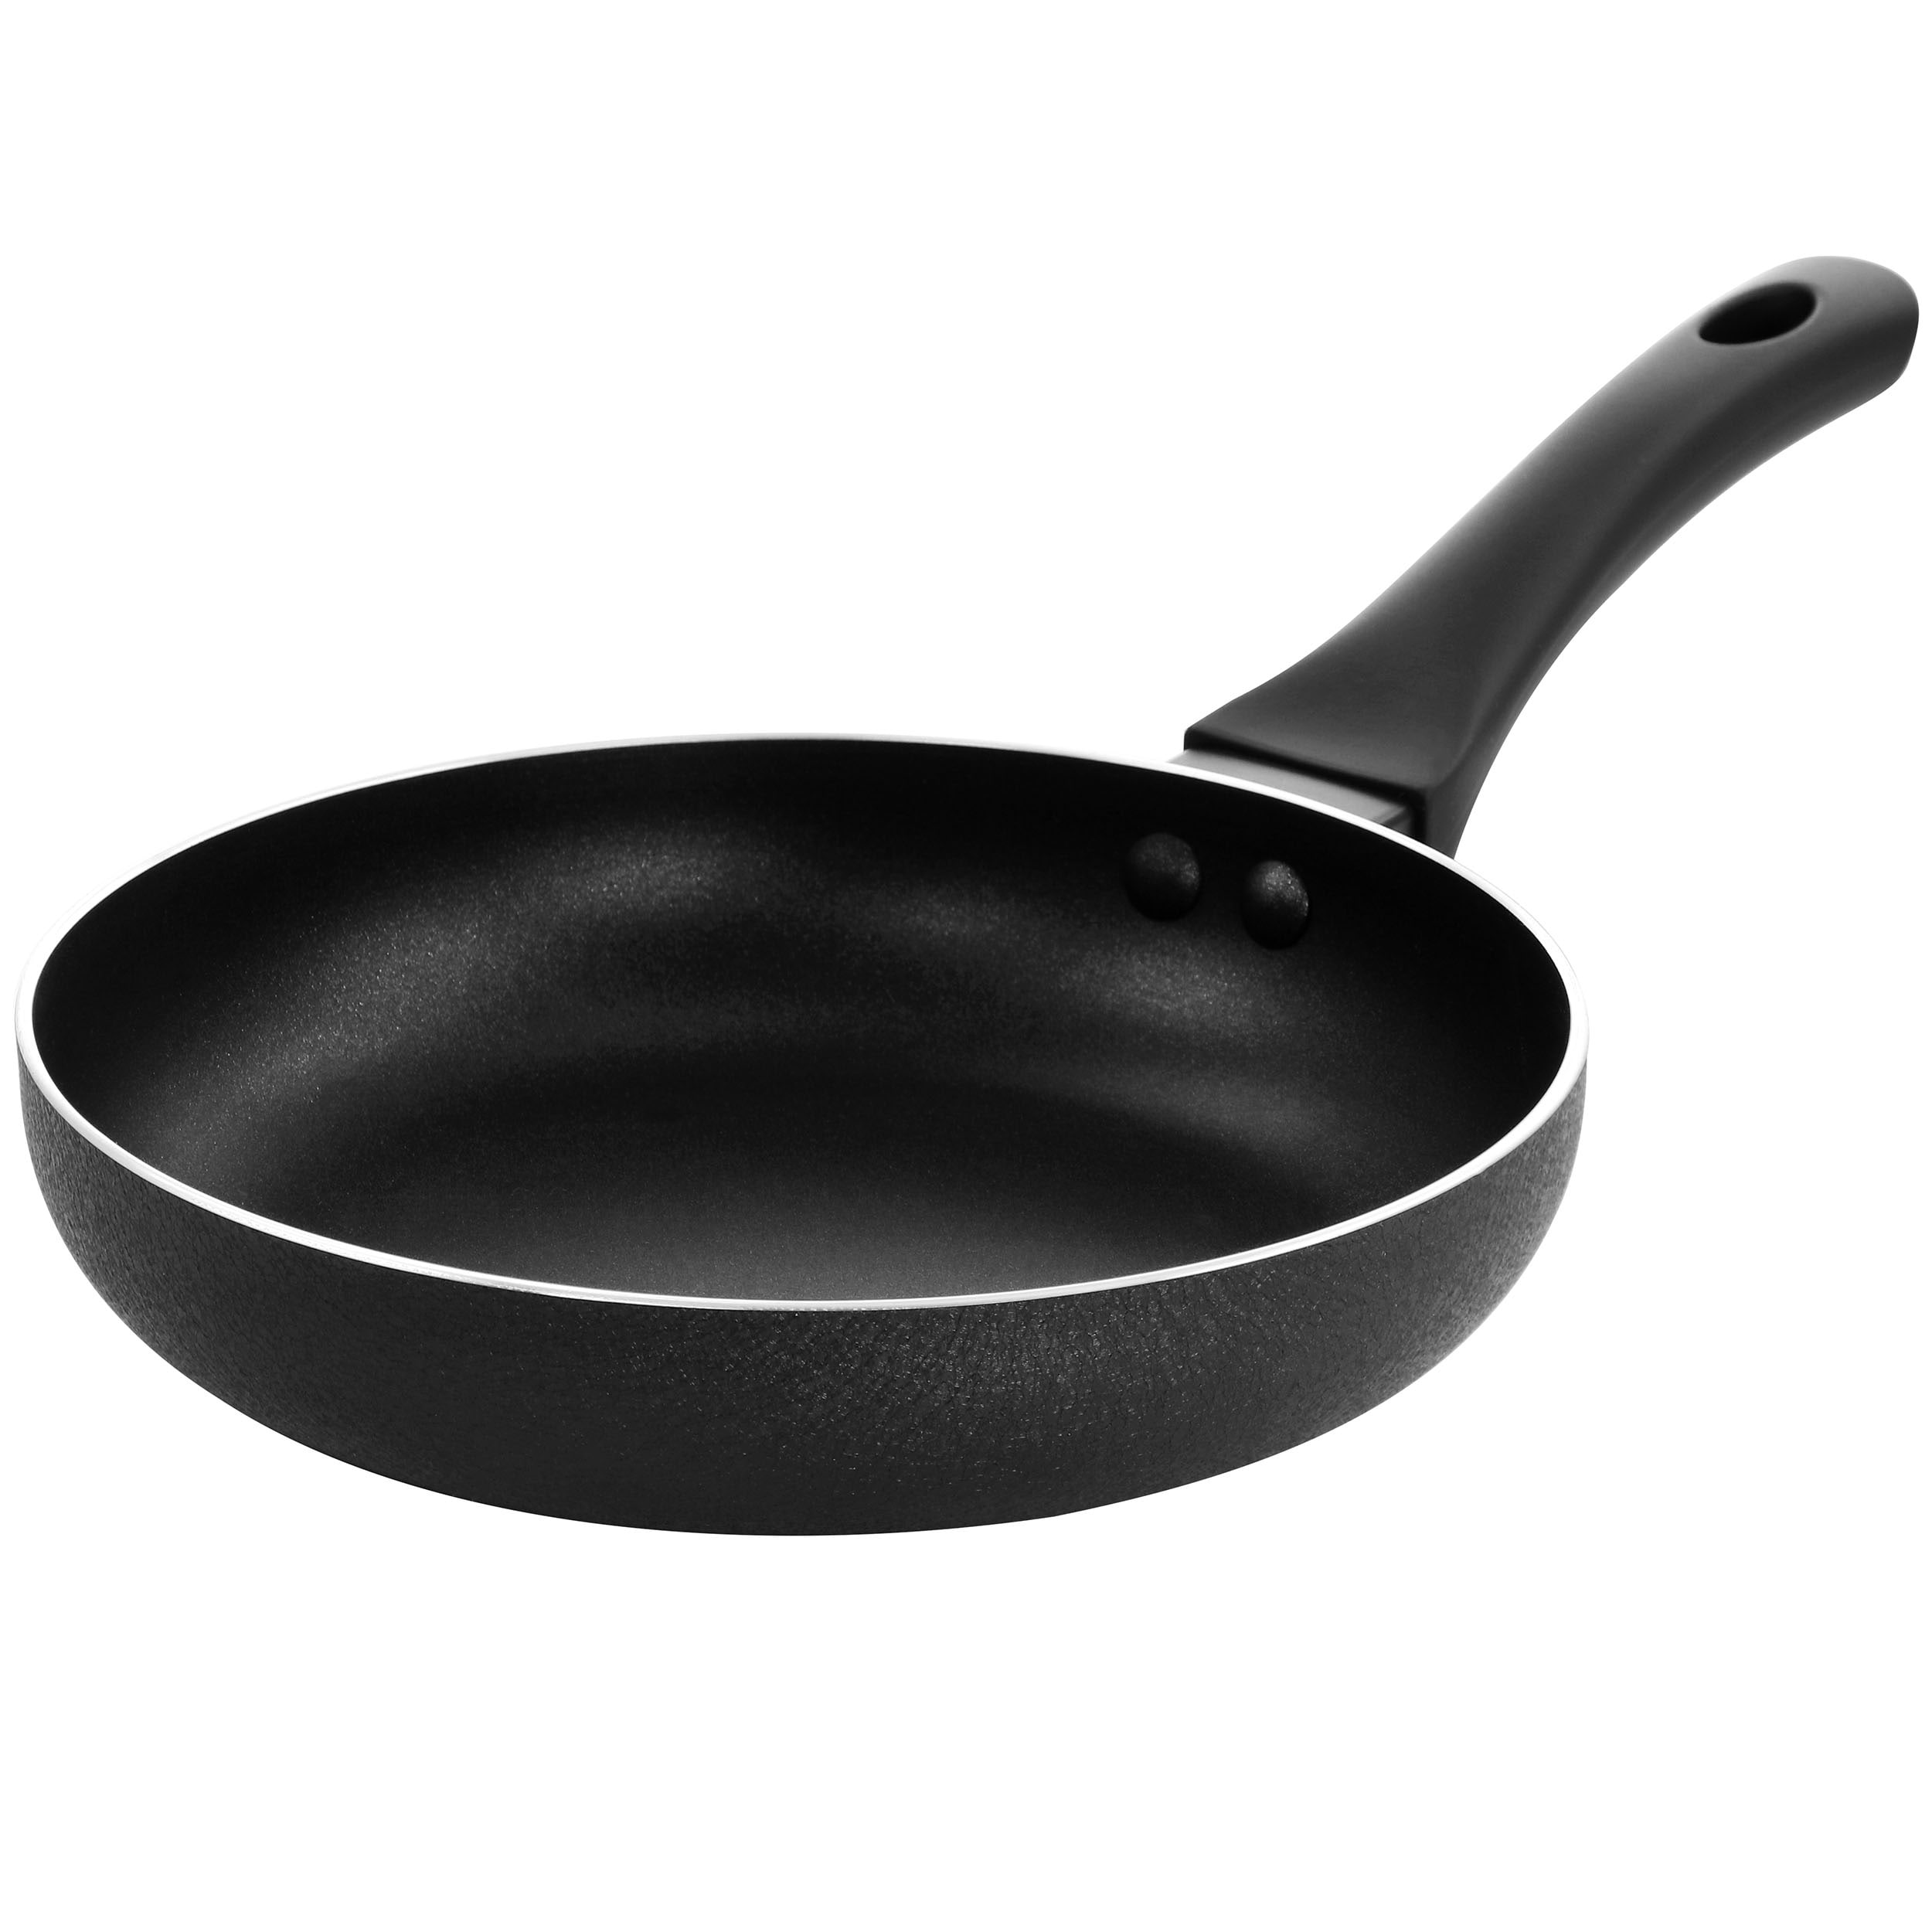 https://ak1.ostkcdn.com/images/products/is/images/direct/f11a8432e686fdca4beade93137064b9ef1c66fb/Oster-Ashford-8-Inch-Non-Stick-Aluminum-Frying-Pan-in-Black.jpg